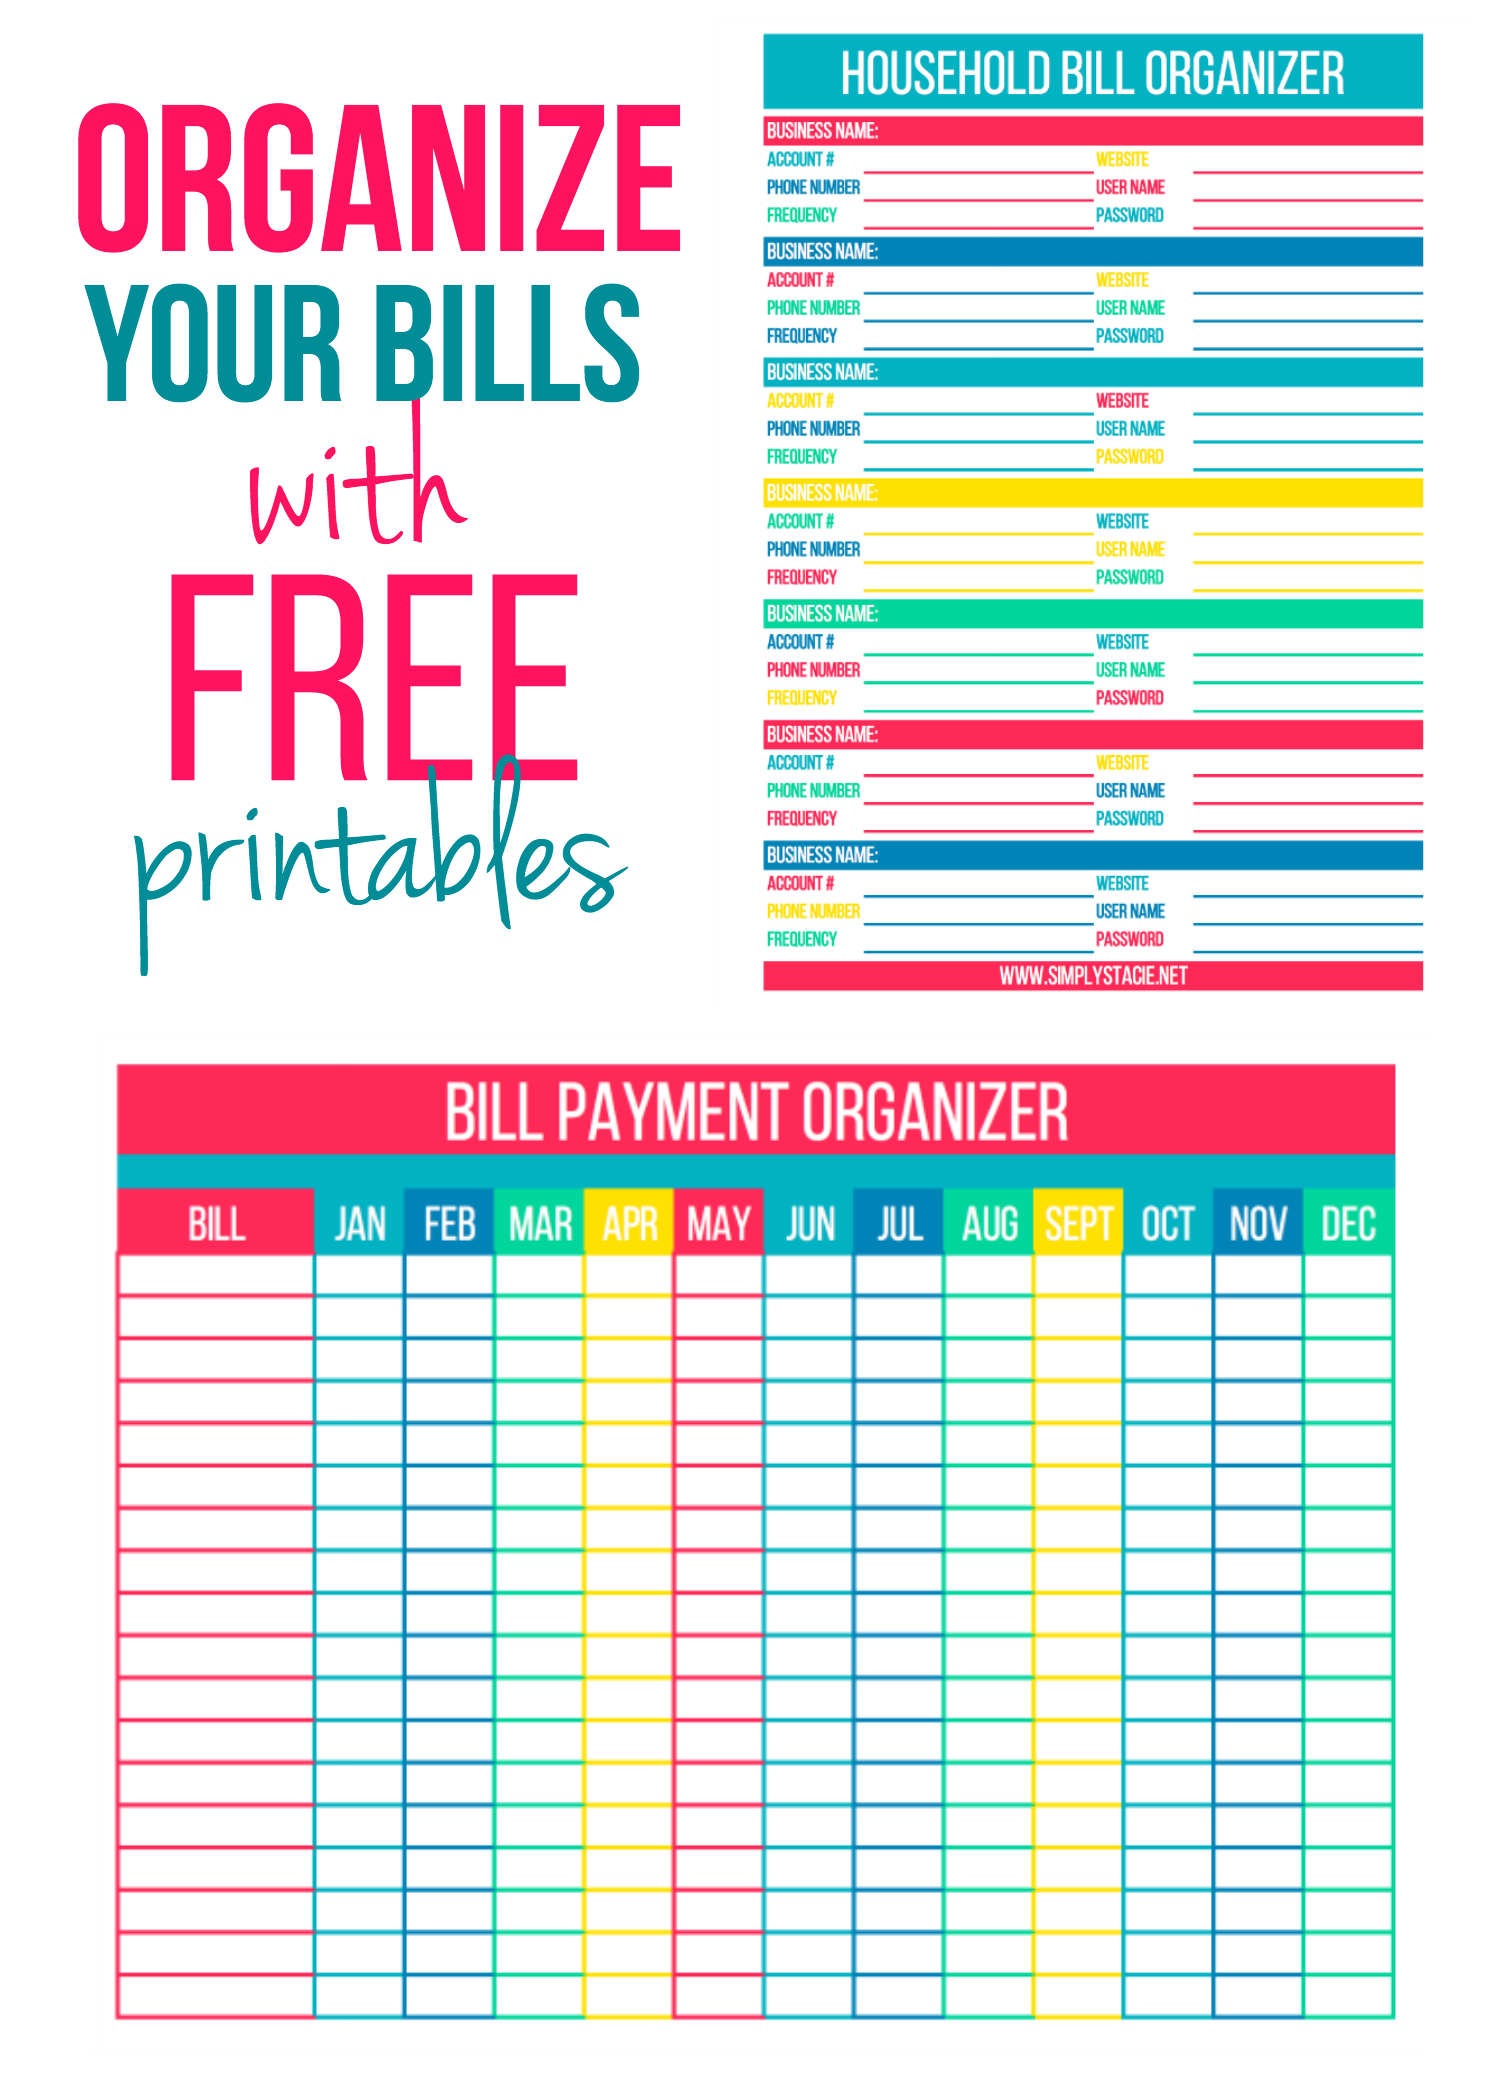 Organize Your Bills With Free Printables | Organize Me | Bill - Free Printable Bill Organizer